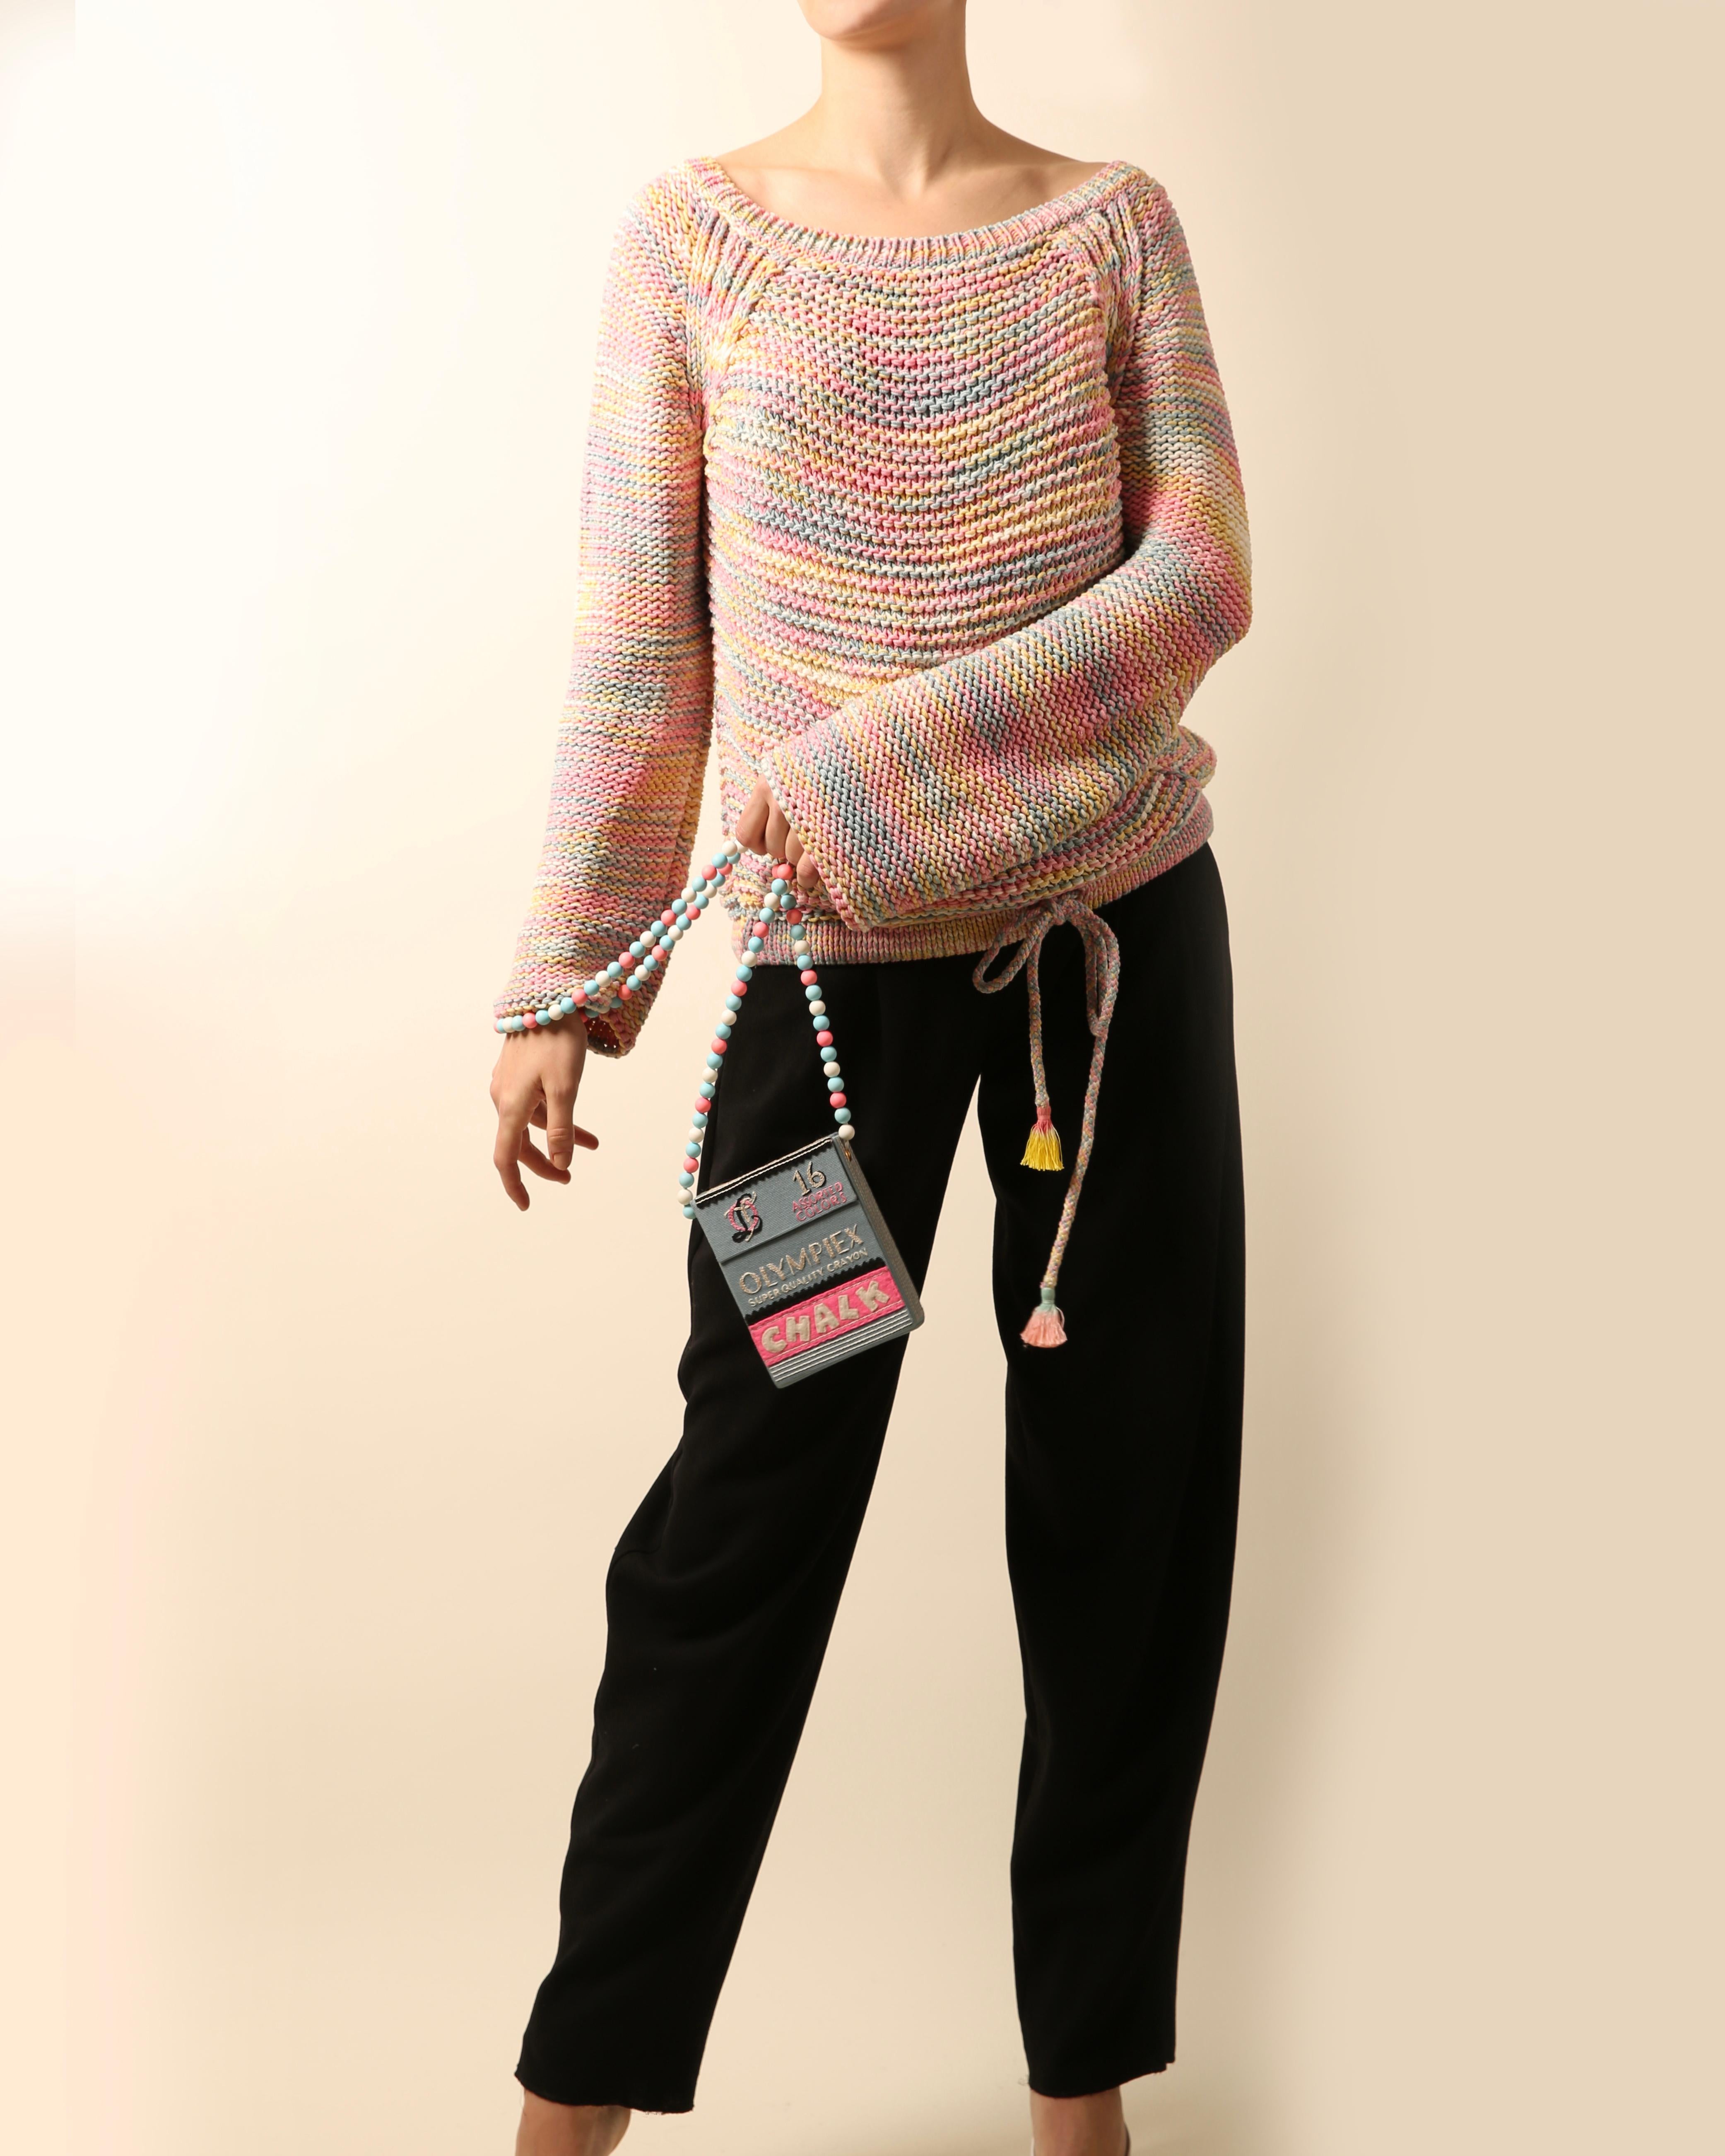 From the Chloe Spring Summer 2016 runway collection
Oversized chunky knit sweater in 'rainbow' - a combination of pastel pink, blue, yellow and cream
Slouched fit that can be worn on or off the shoulder
Large front pocket
Drawstring tassel